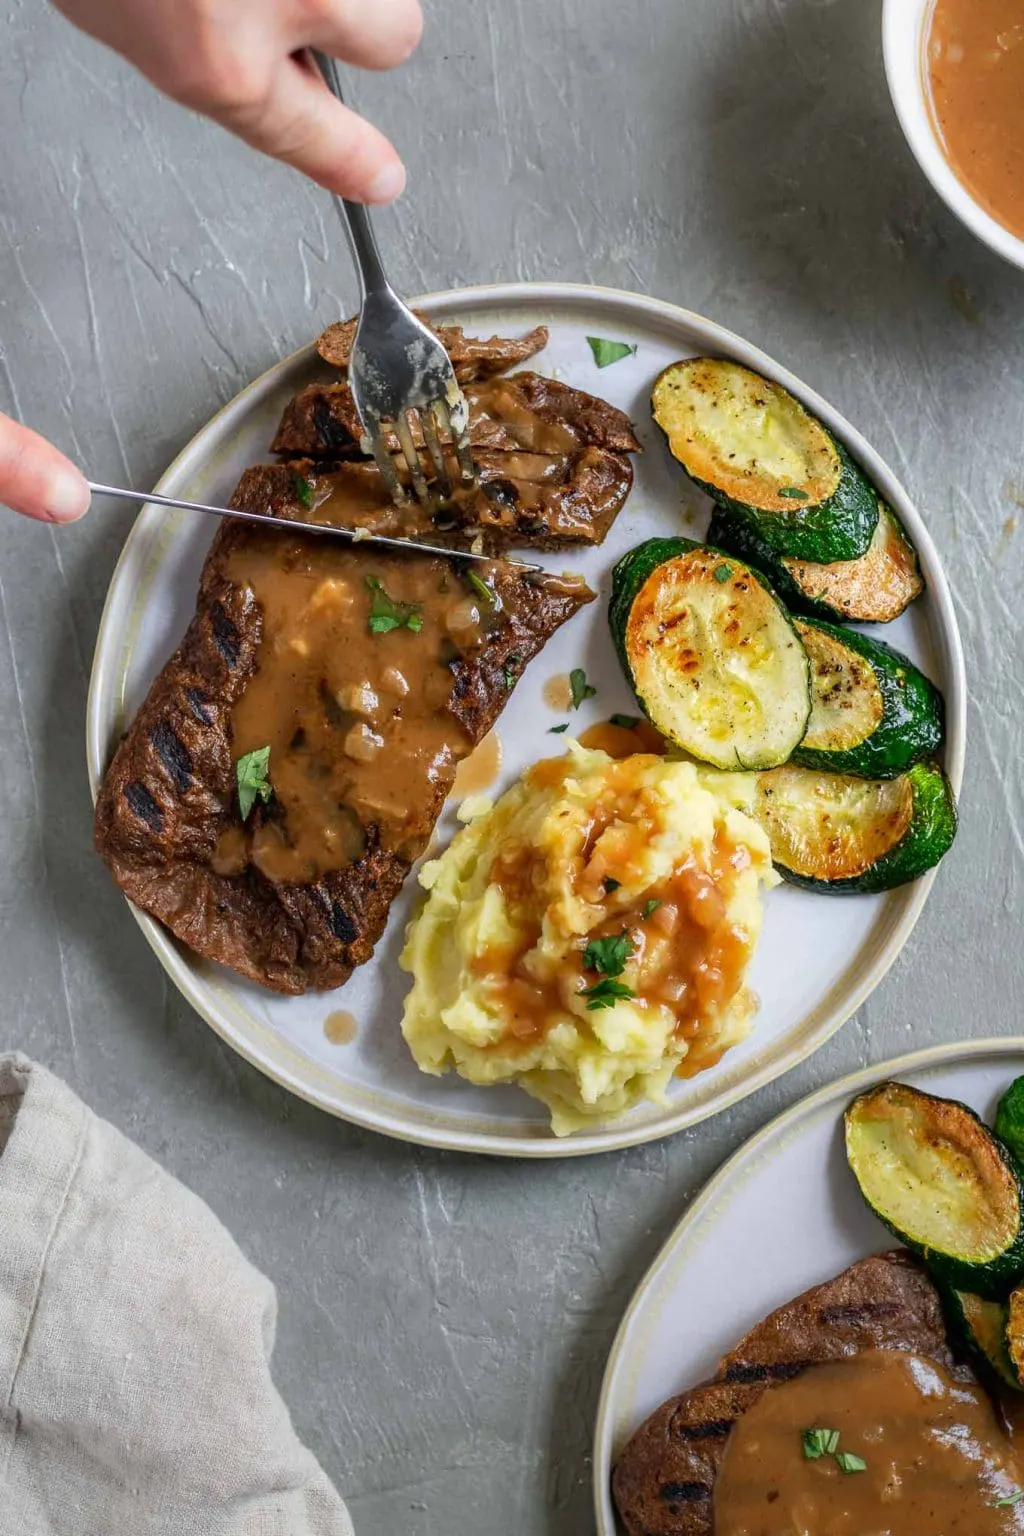 Grilled homemade seitan steaks with mashed potatoes and shallot gravy with a side of zucchini and a garnish of parsley. The steak is being cut with a knife and fork with hands in the photo and there is extra gravy served on the side.